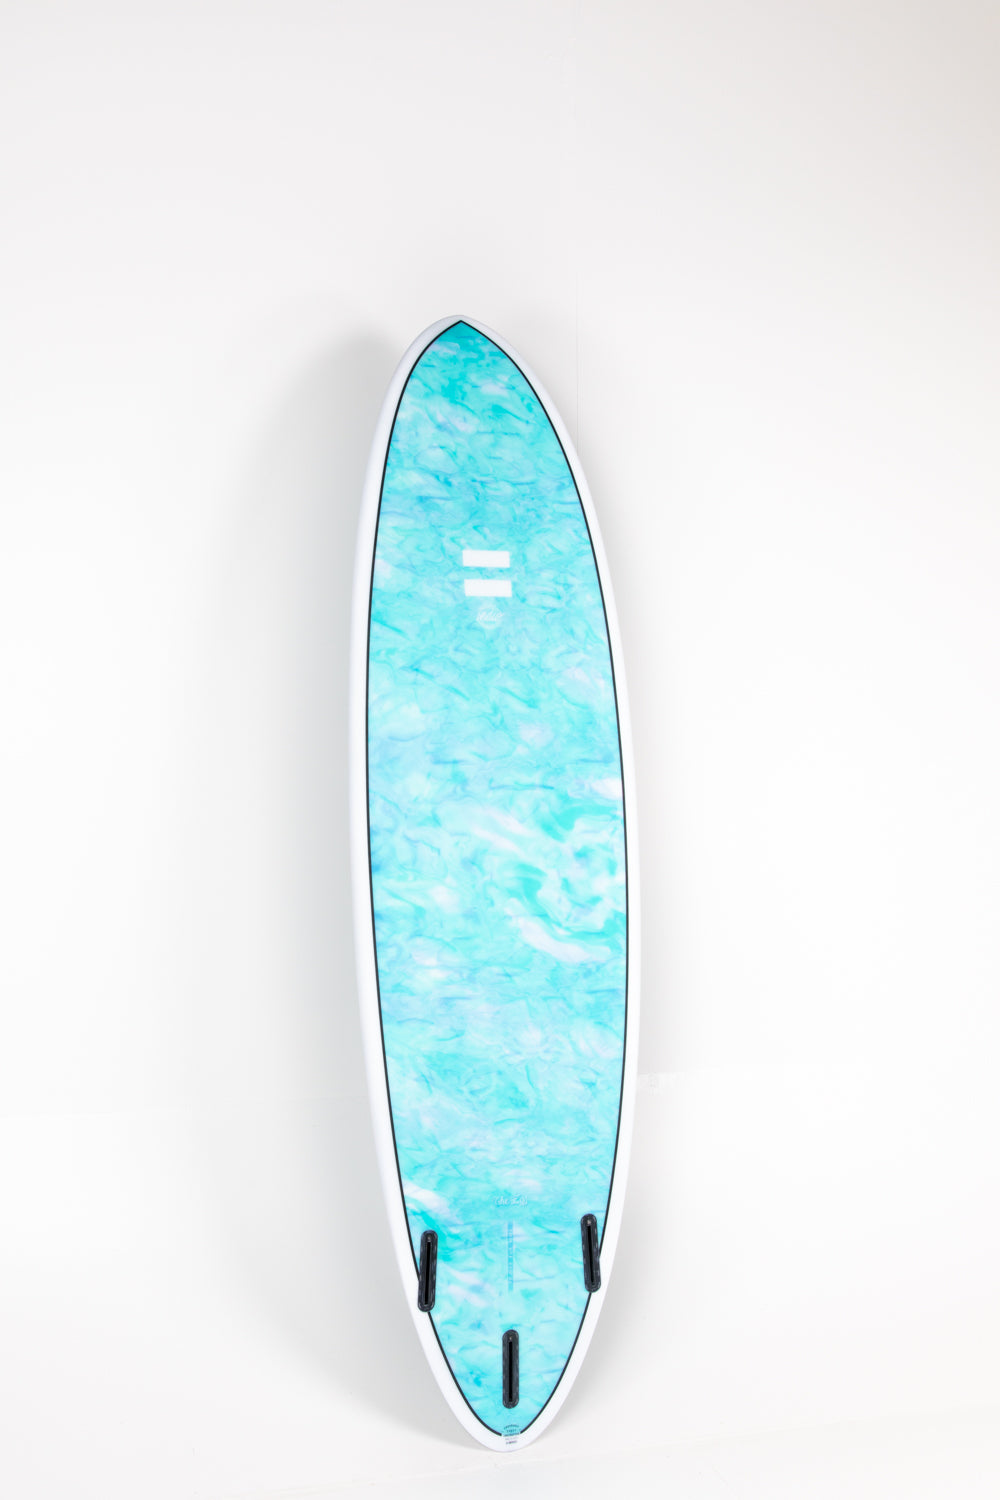 Indio Surfboards - THE EGG Swirl Effect Blue Mint - 6´8 x 21 1/2 x 